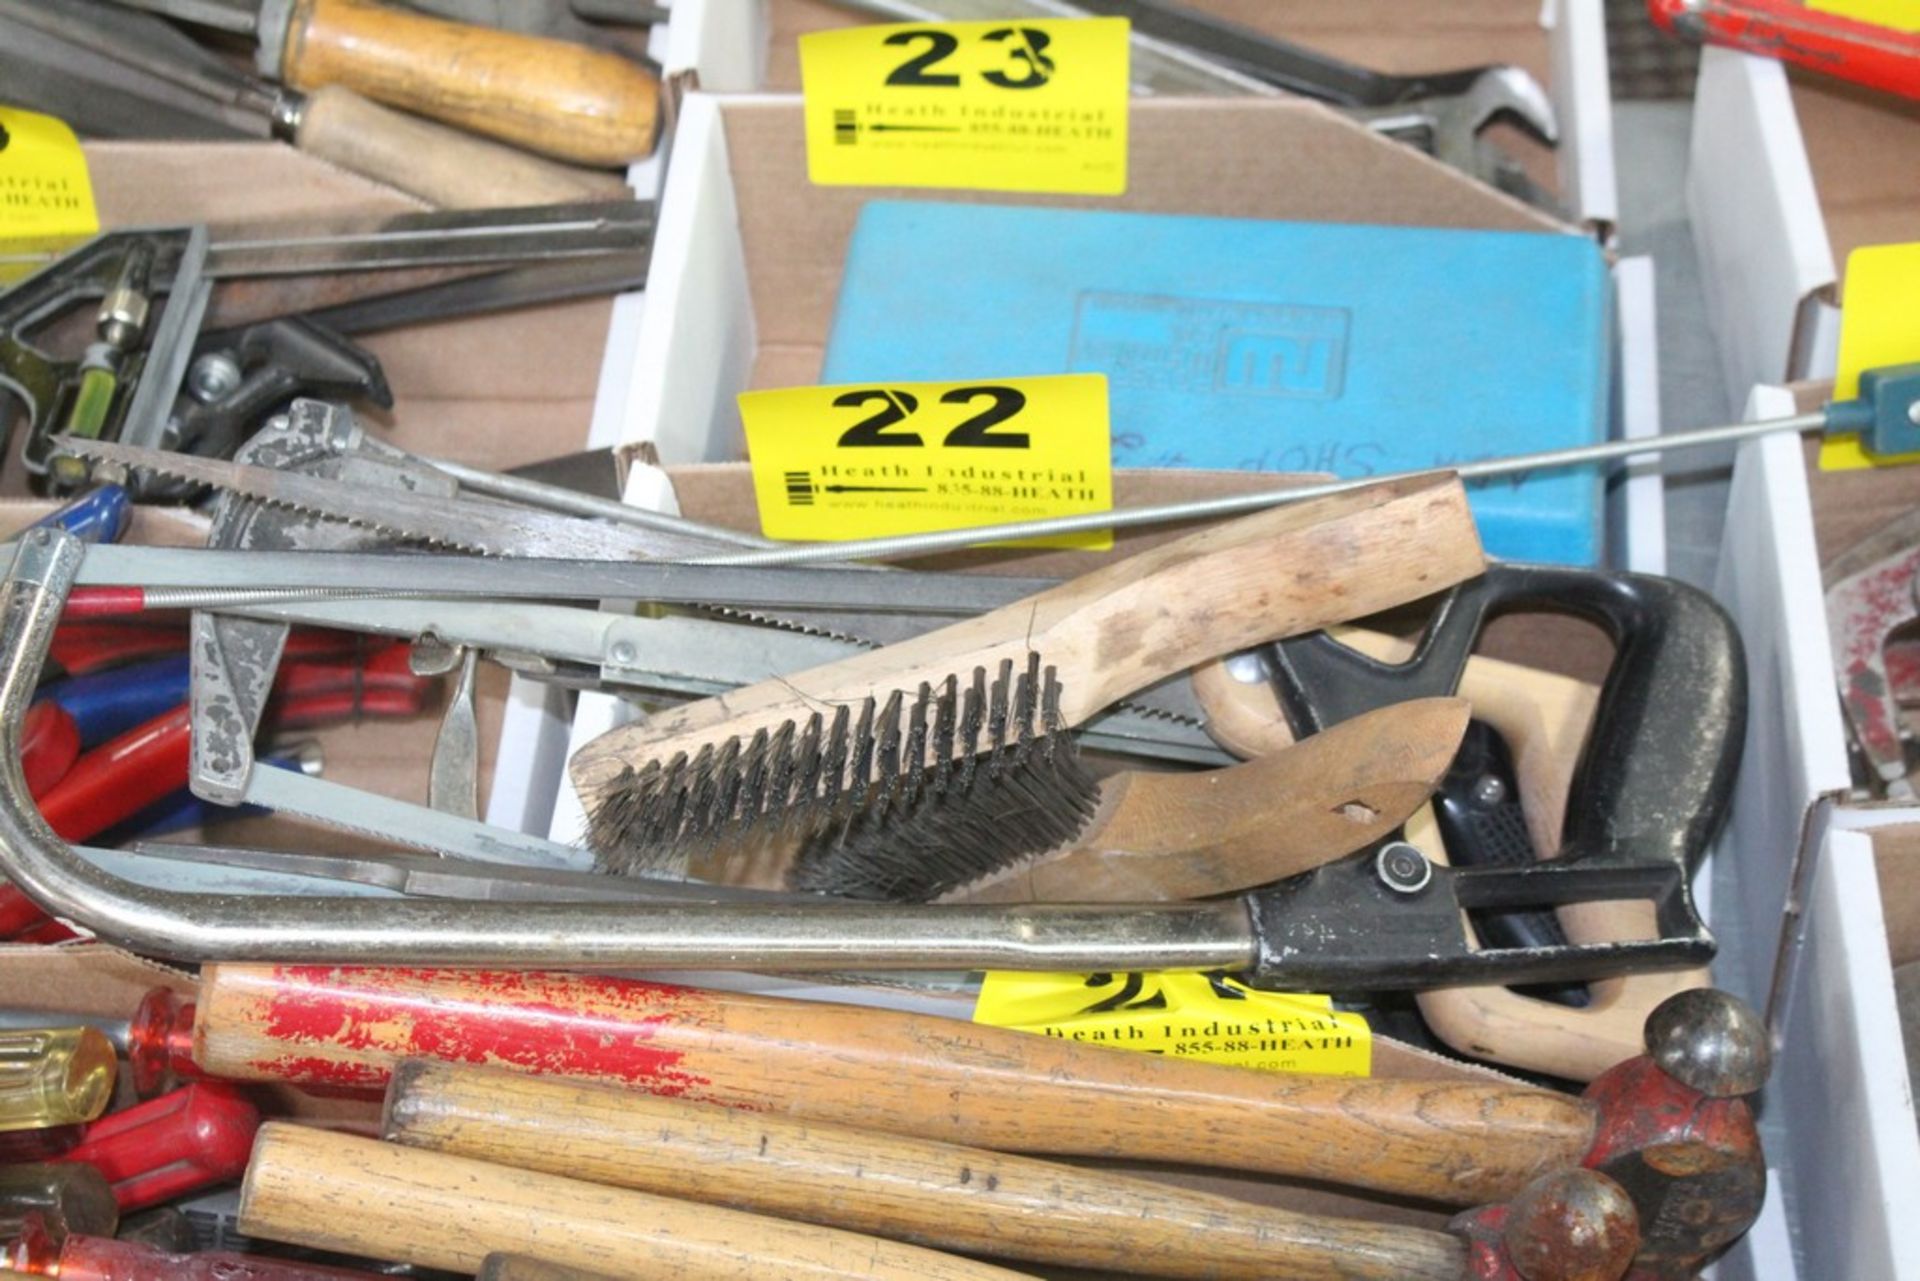 ASSORTED TOOLS, INCLUDING SAWS, WIRE BRUSHES, MAGNETS, ETC.